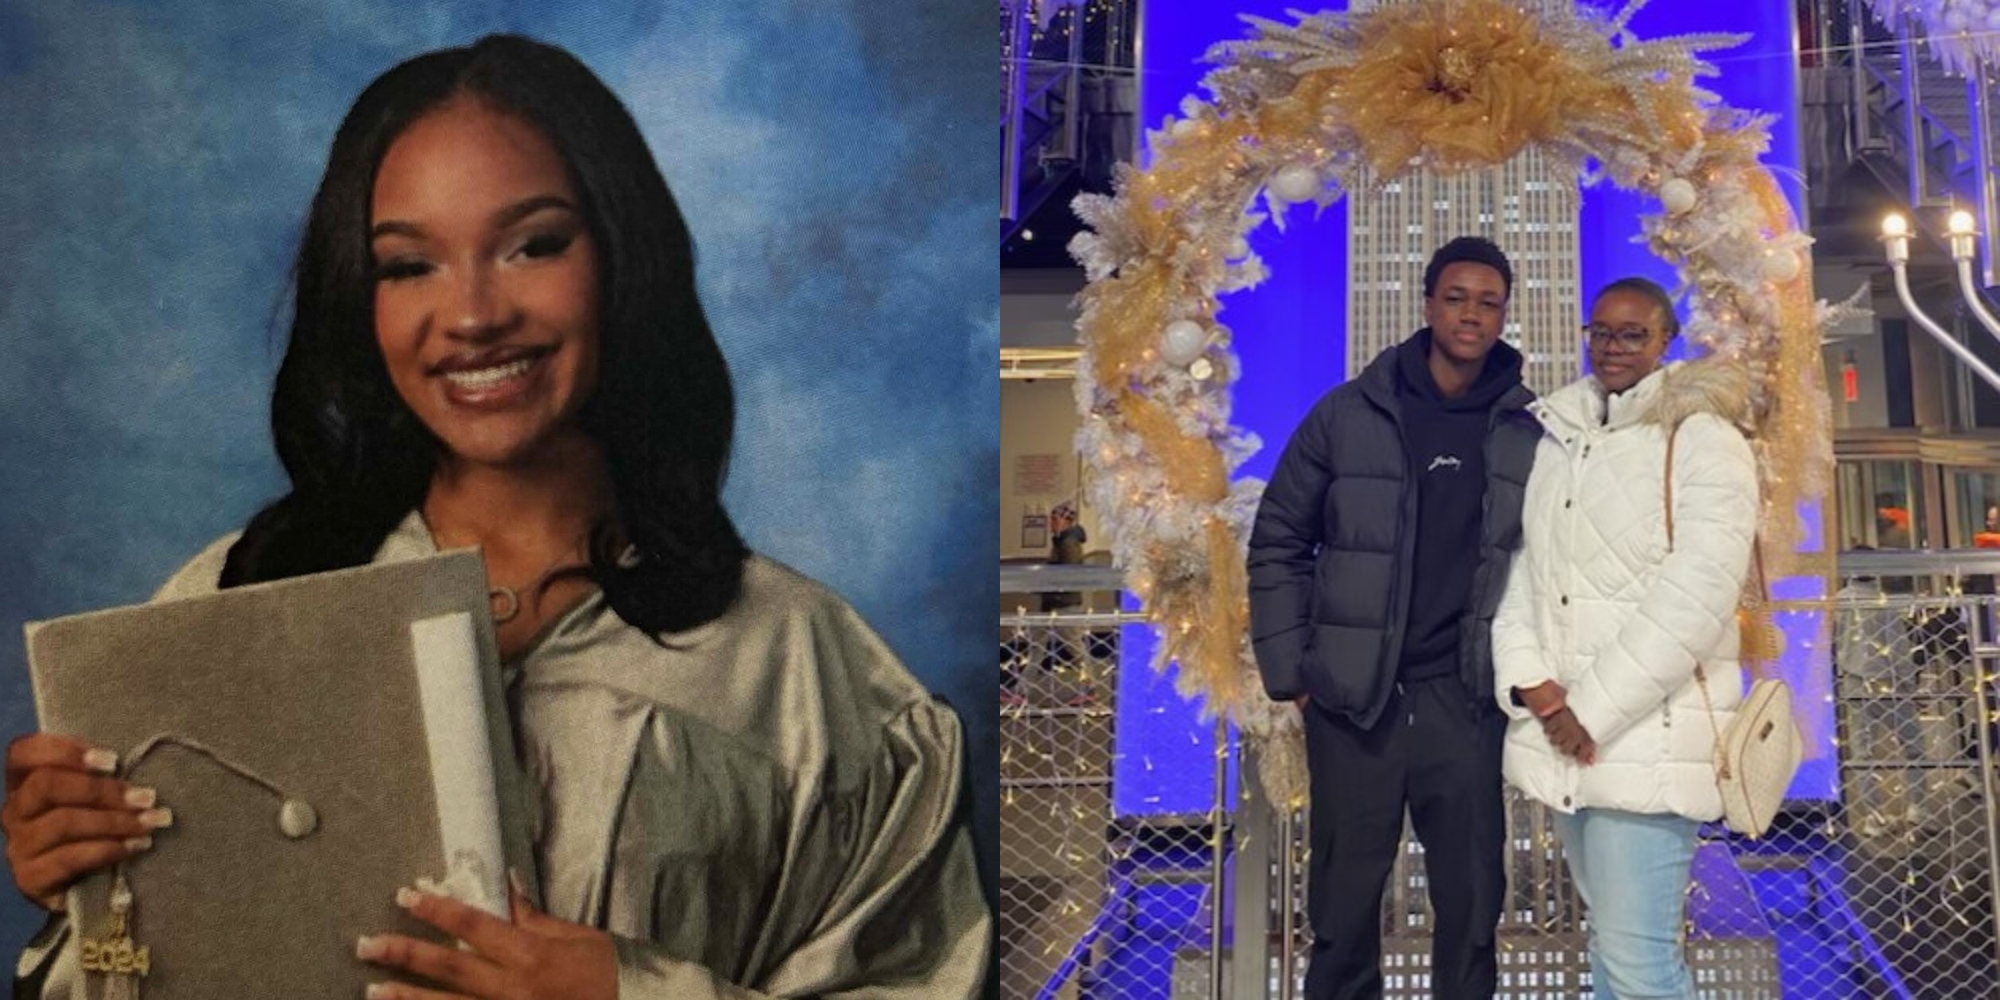 The picture includes two photos side by side; a photo of Jailyn on the left and a photo of Emmanuel and his sister on the right.